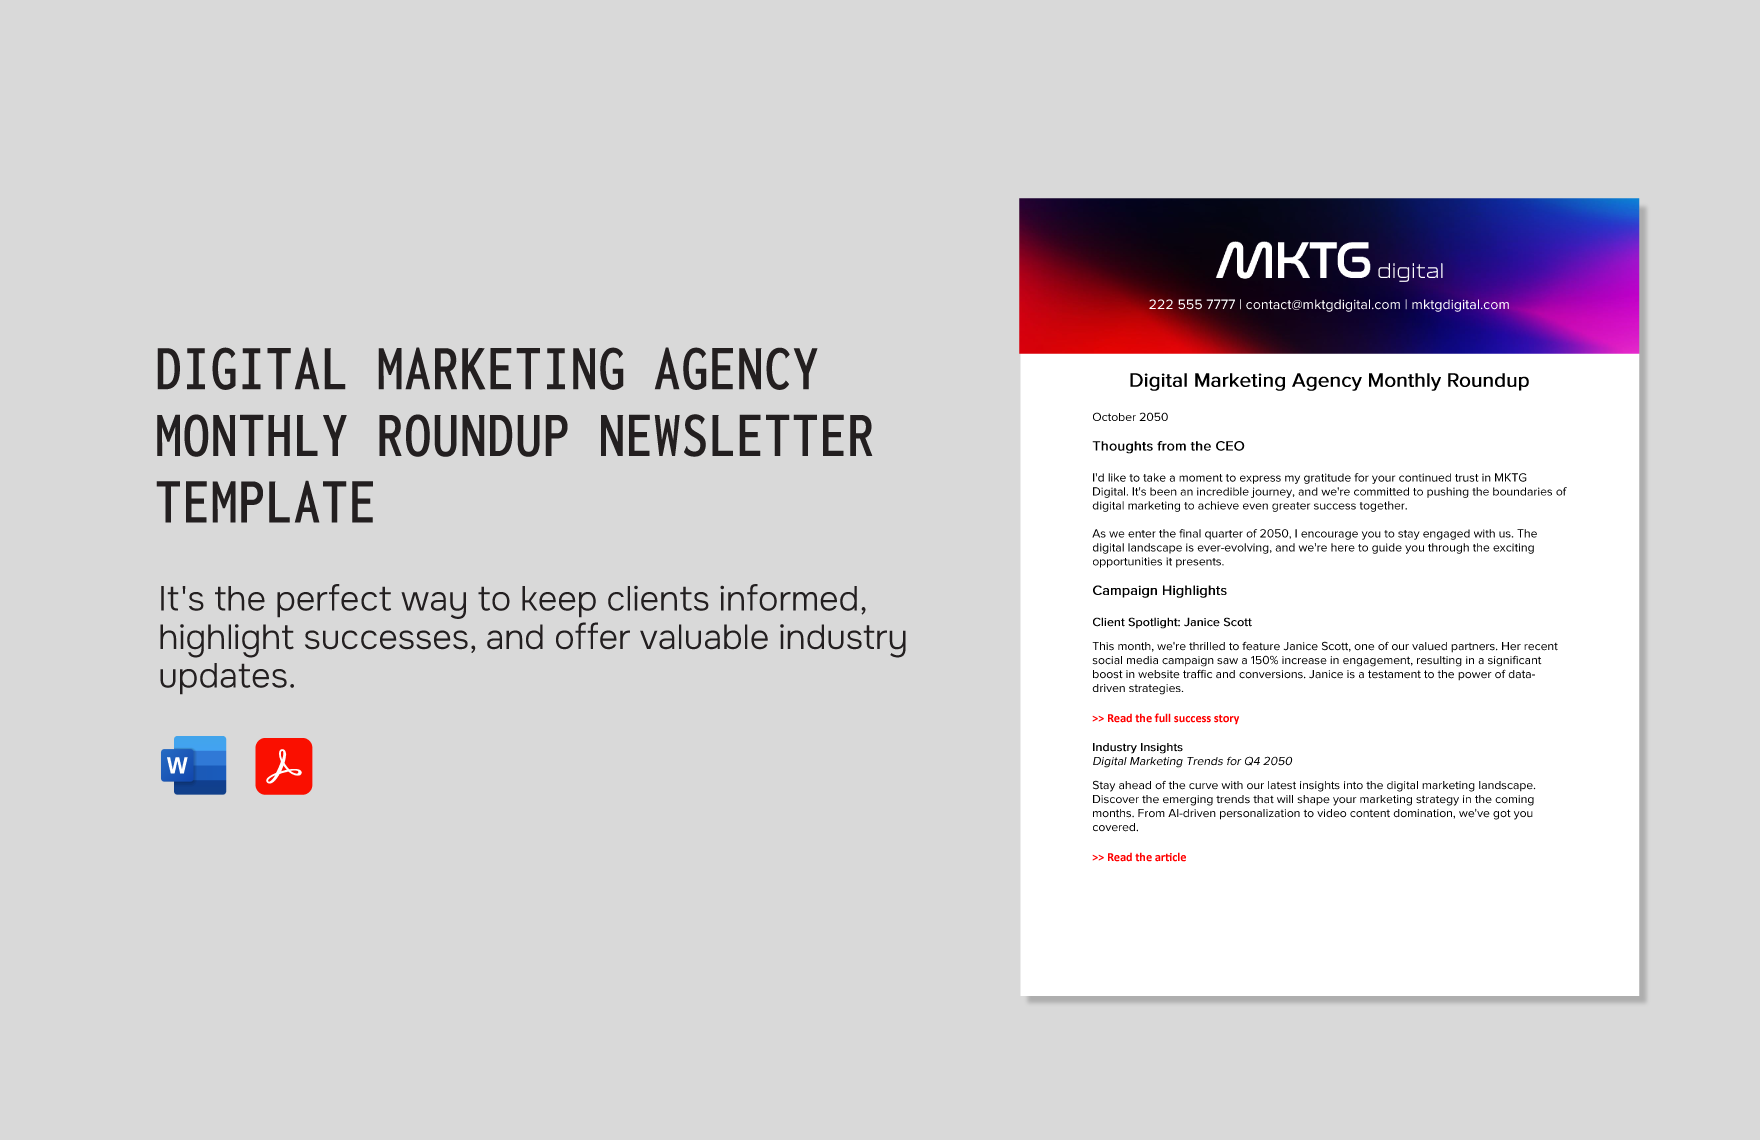 Digital Marketing Agency Monthly Roundup Newsletter Template